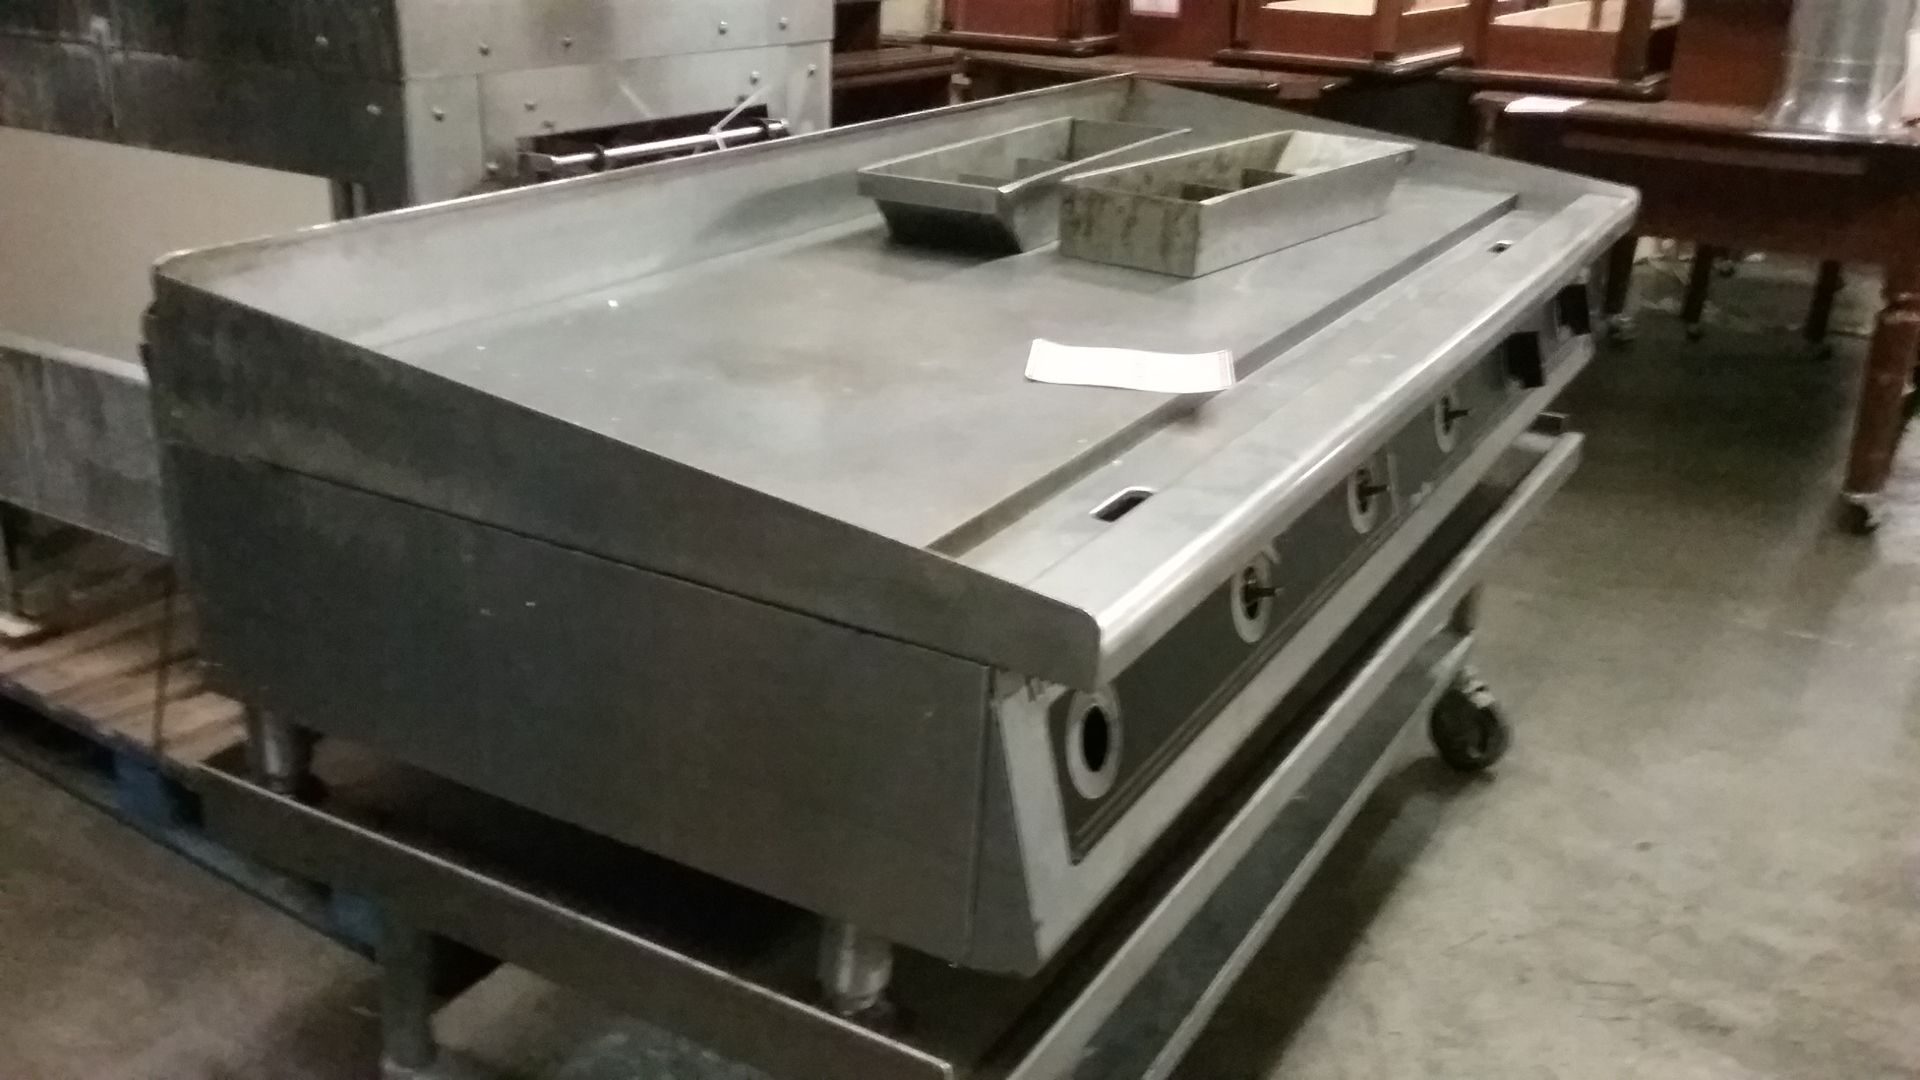 Ultra Max Flat Top Grill 72" x 32" - Image 3 of 3